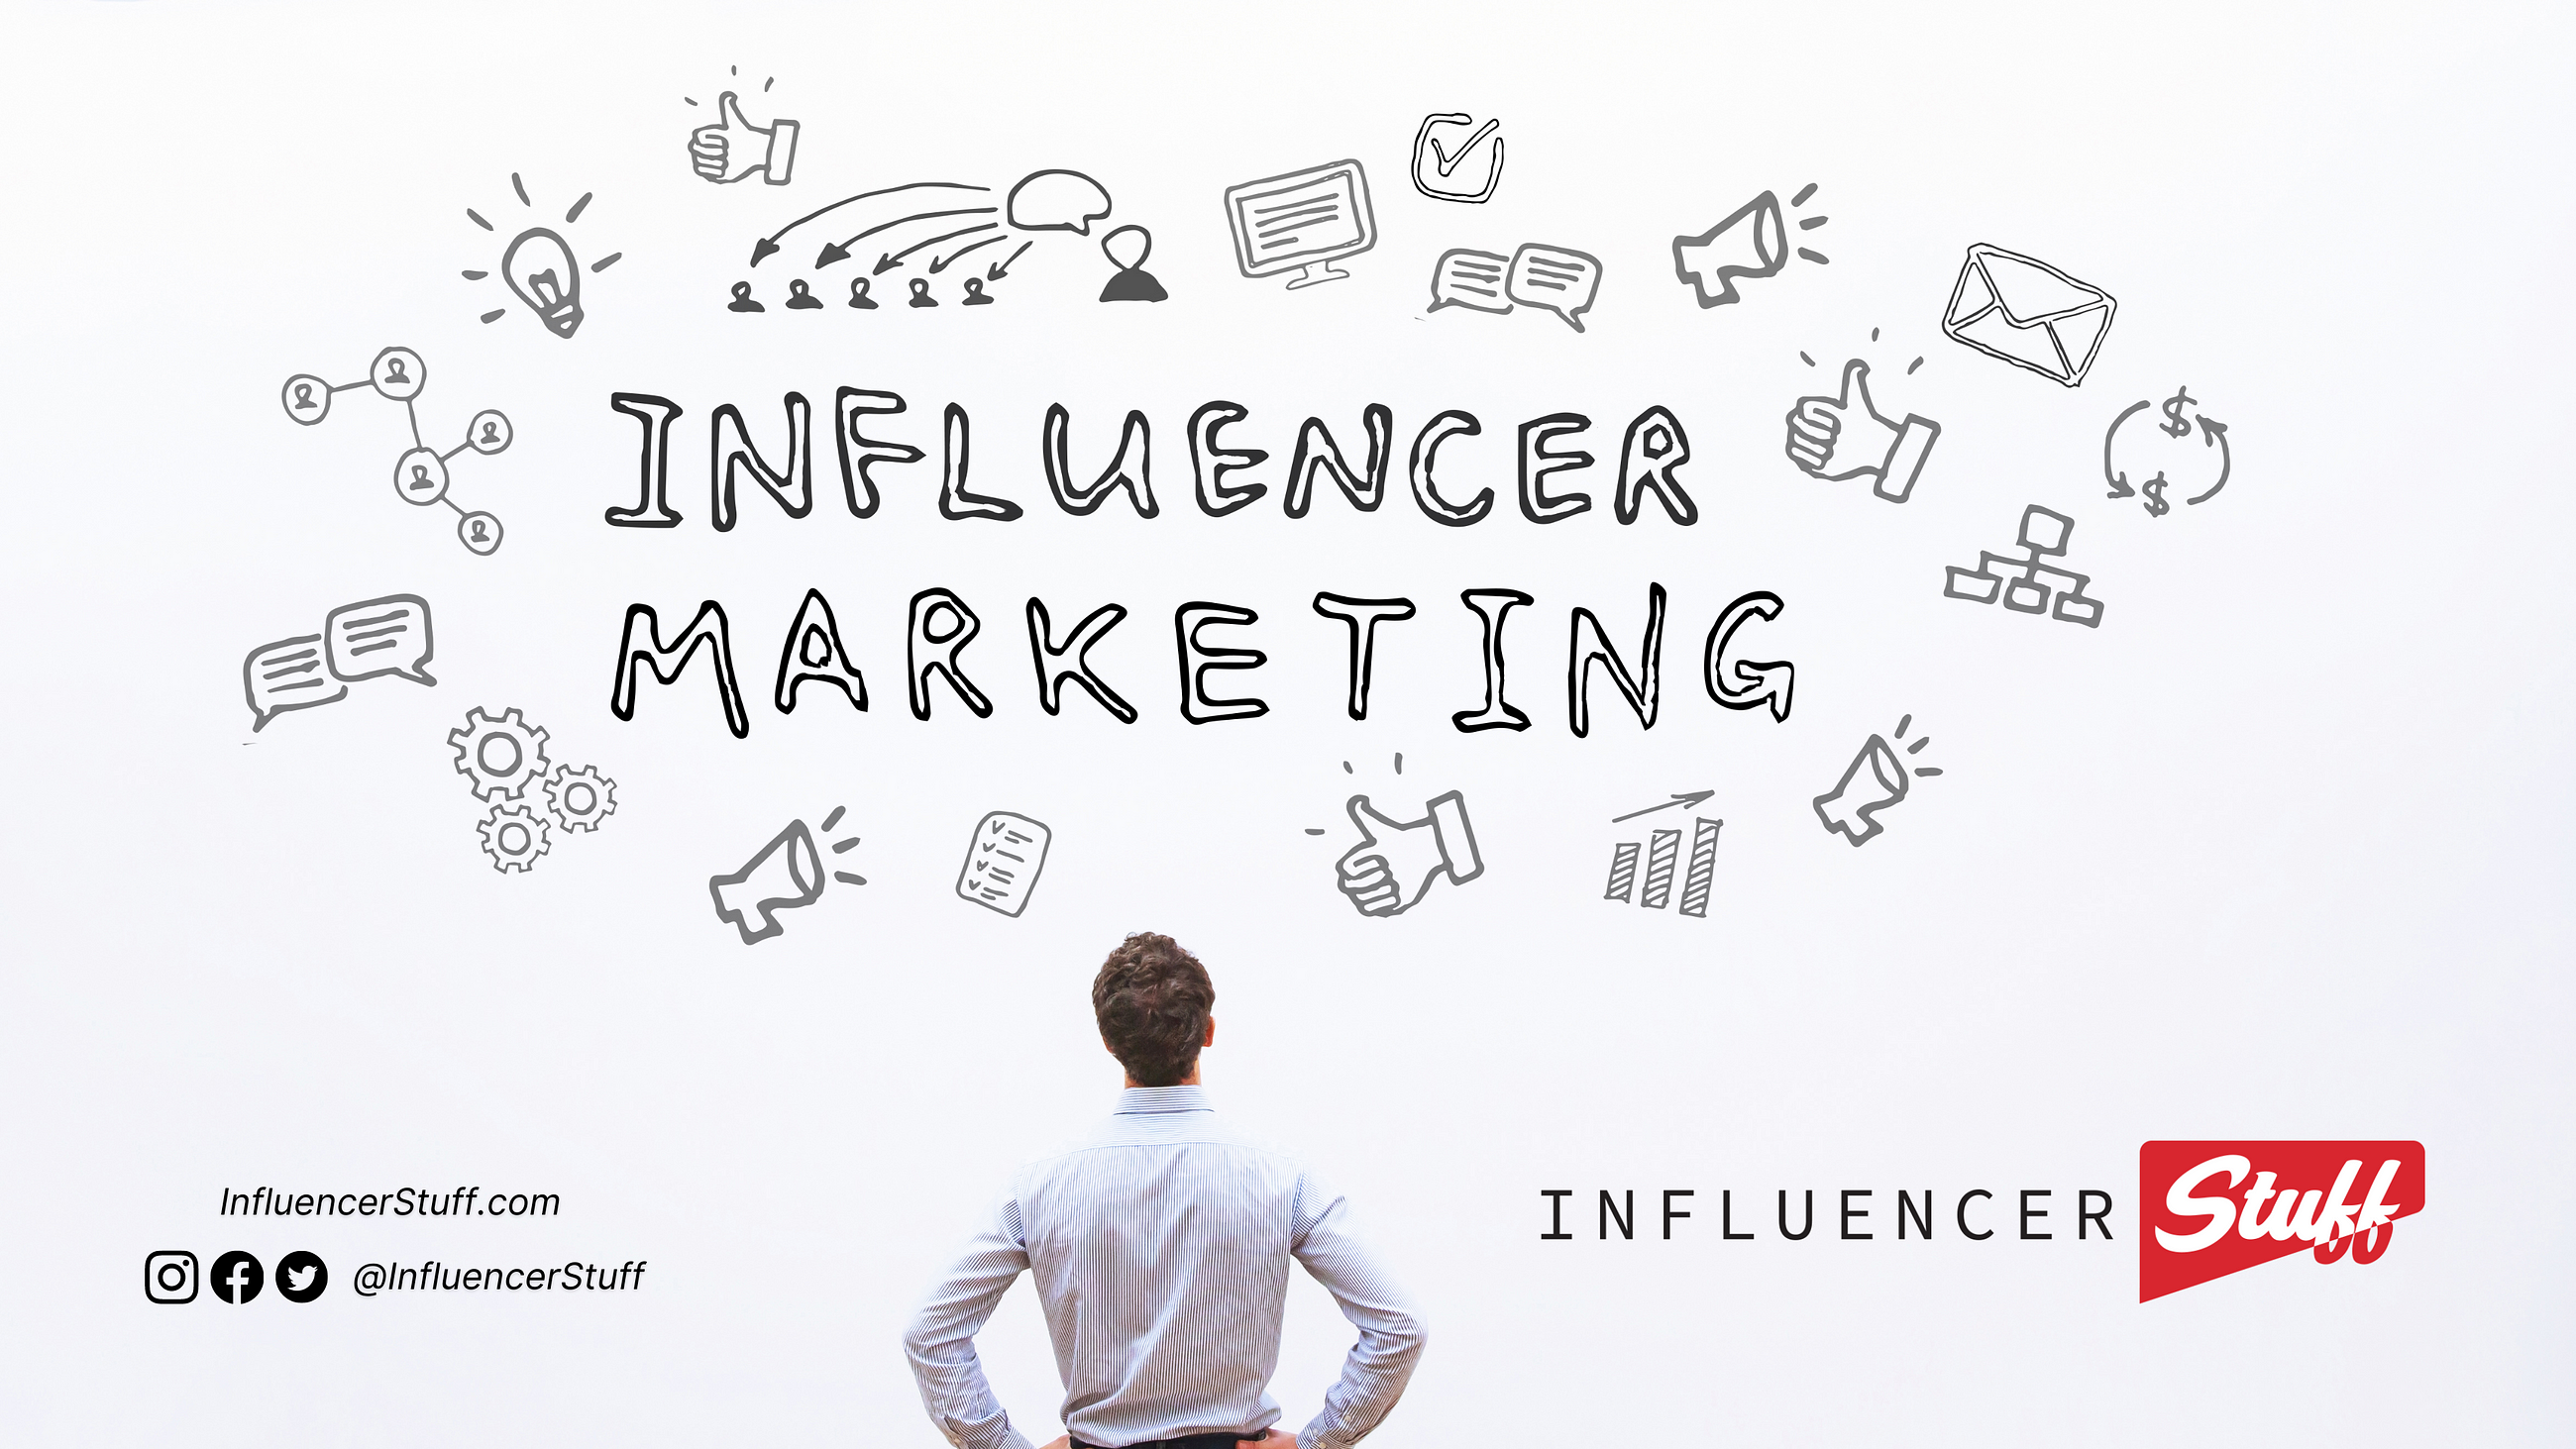 Improving How Influencer Marketing is Done!